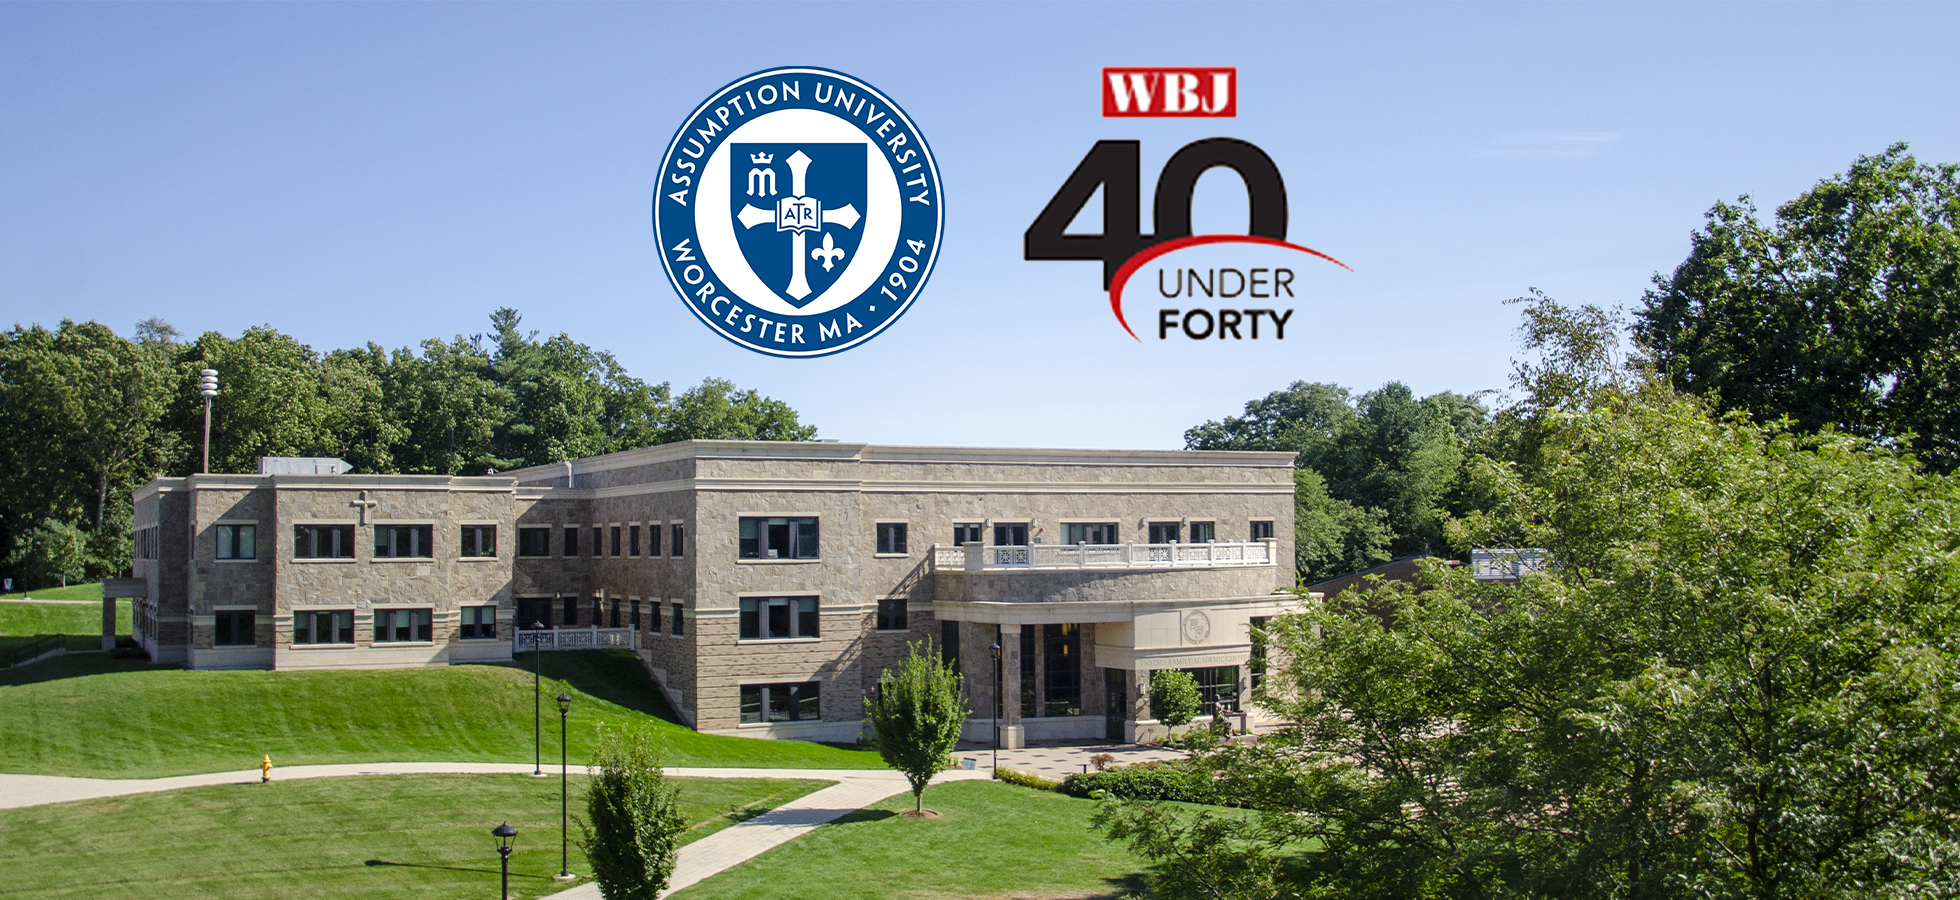 Three Assumption Alumni have been named to the Worcester Business Journal's 40 Under Forty list